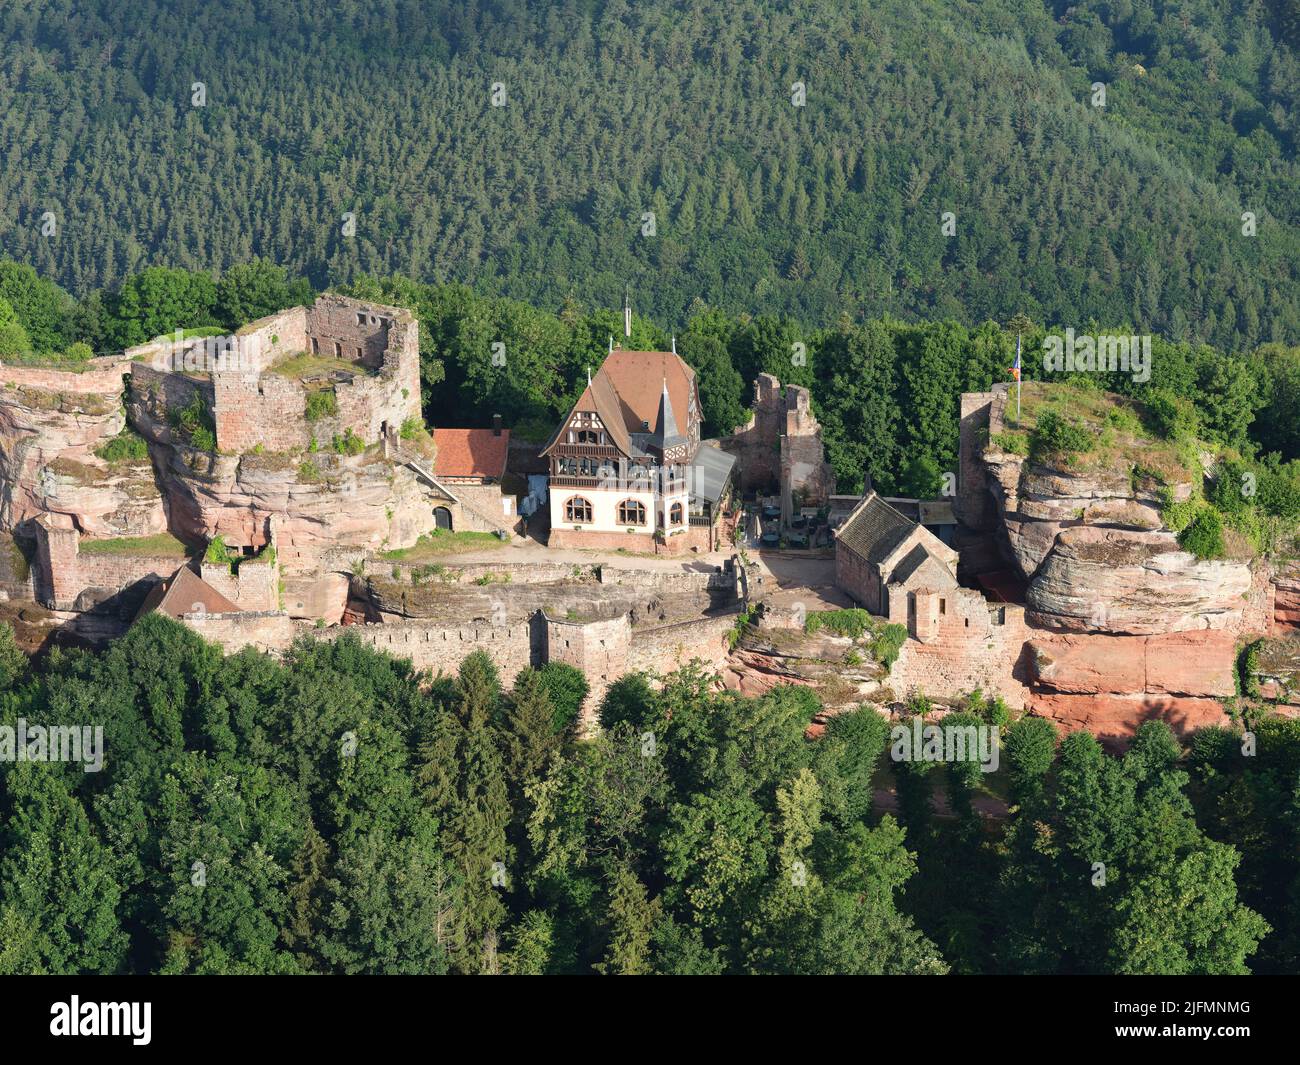 AERIAL VIEW. Ruins of a medieval castle built on an outcrop of sandstone on the Eastern Vosges mountains. Haut-Barr Castle, Saverne, Alsace, France. Stock Photo